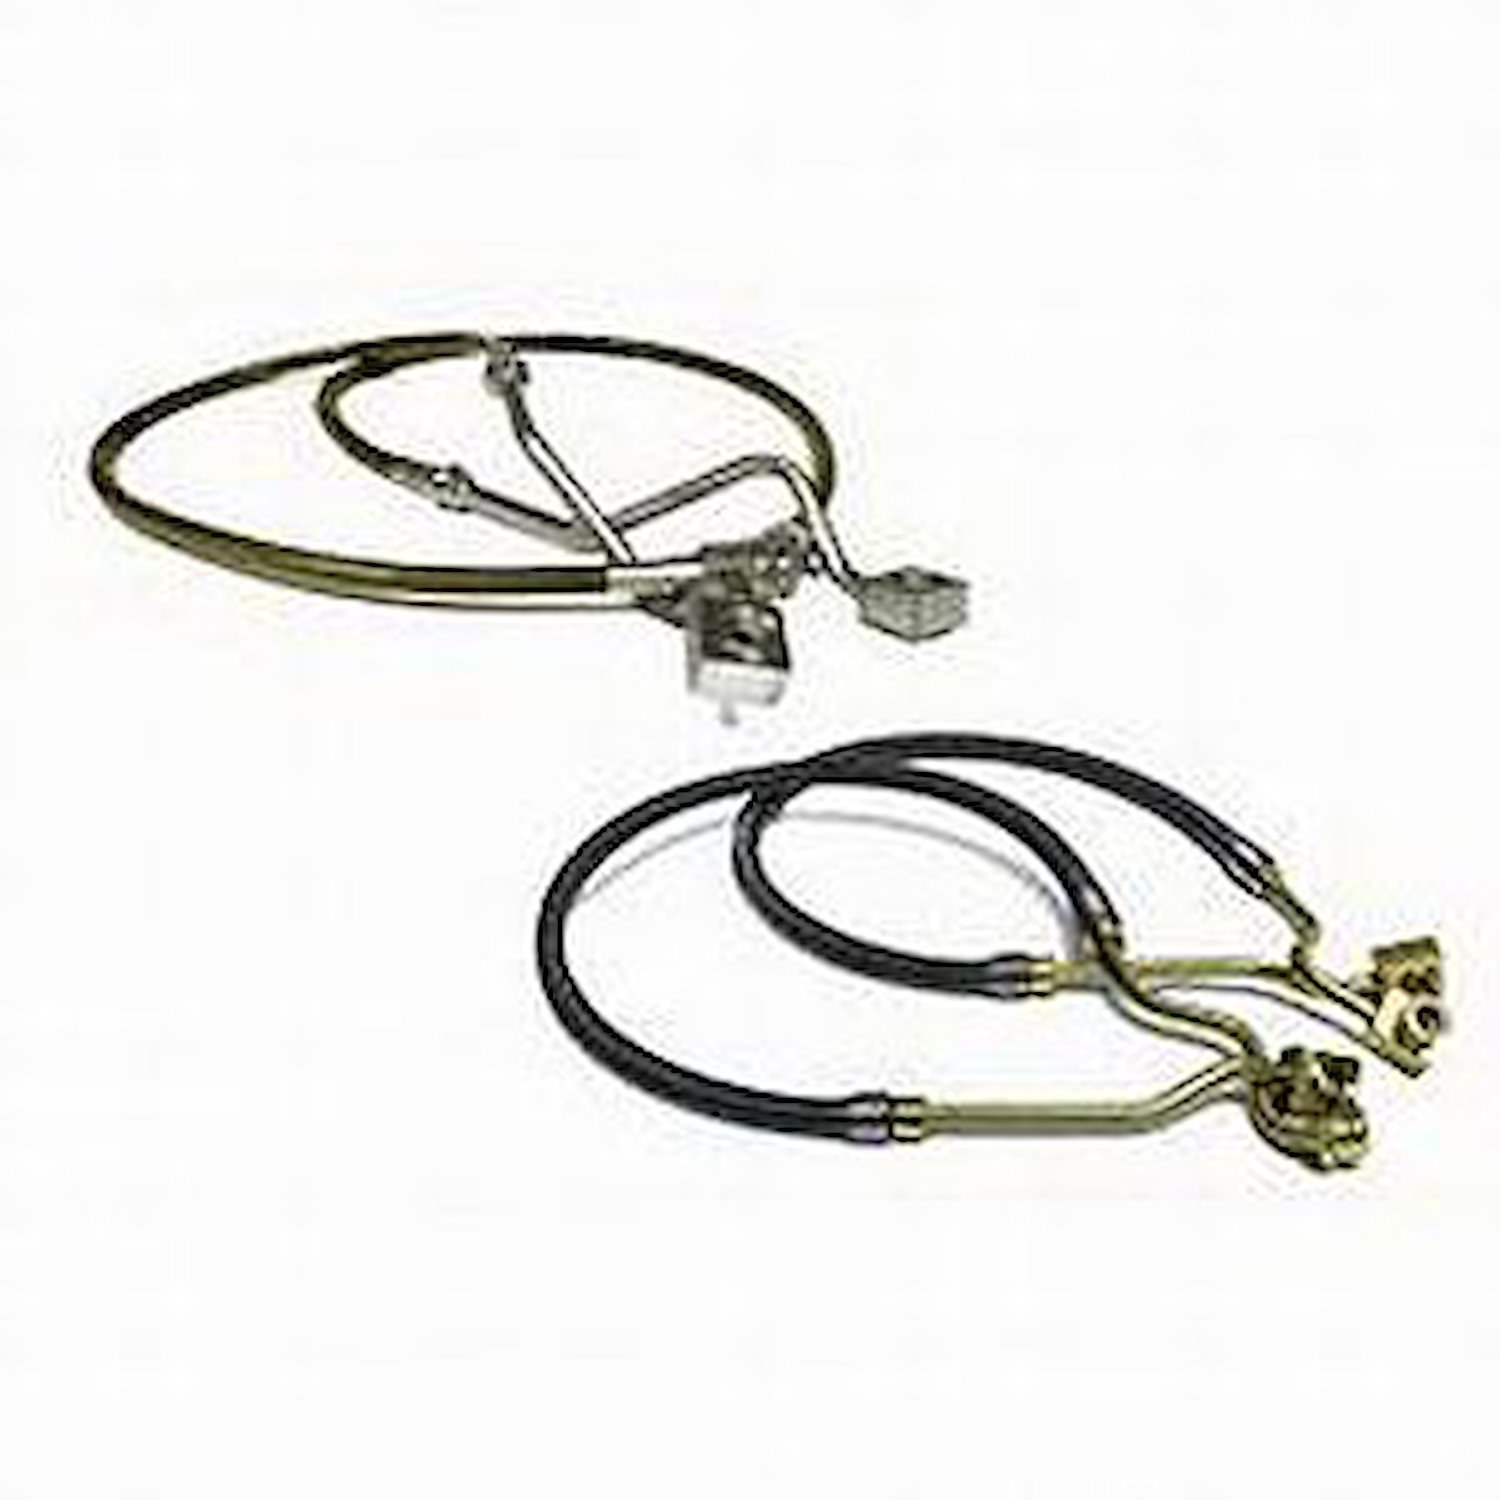 Bullet Proof Kevlar  Brake Hose Front Reinforced Braided Stainless Steel Vehicles w/4-8 in. Lift